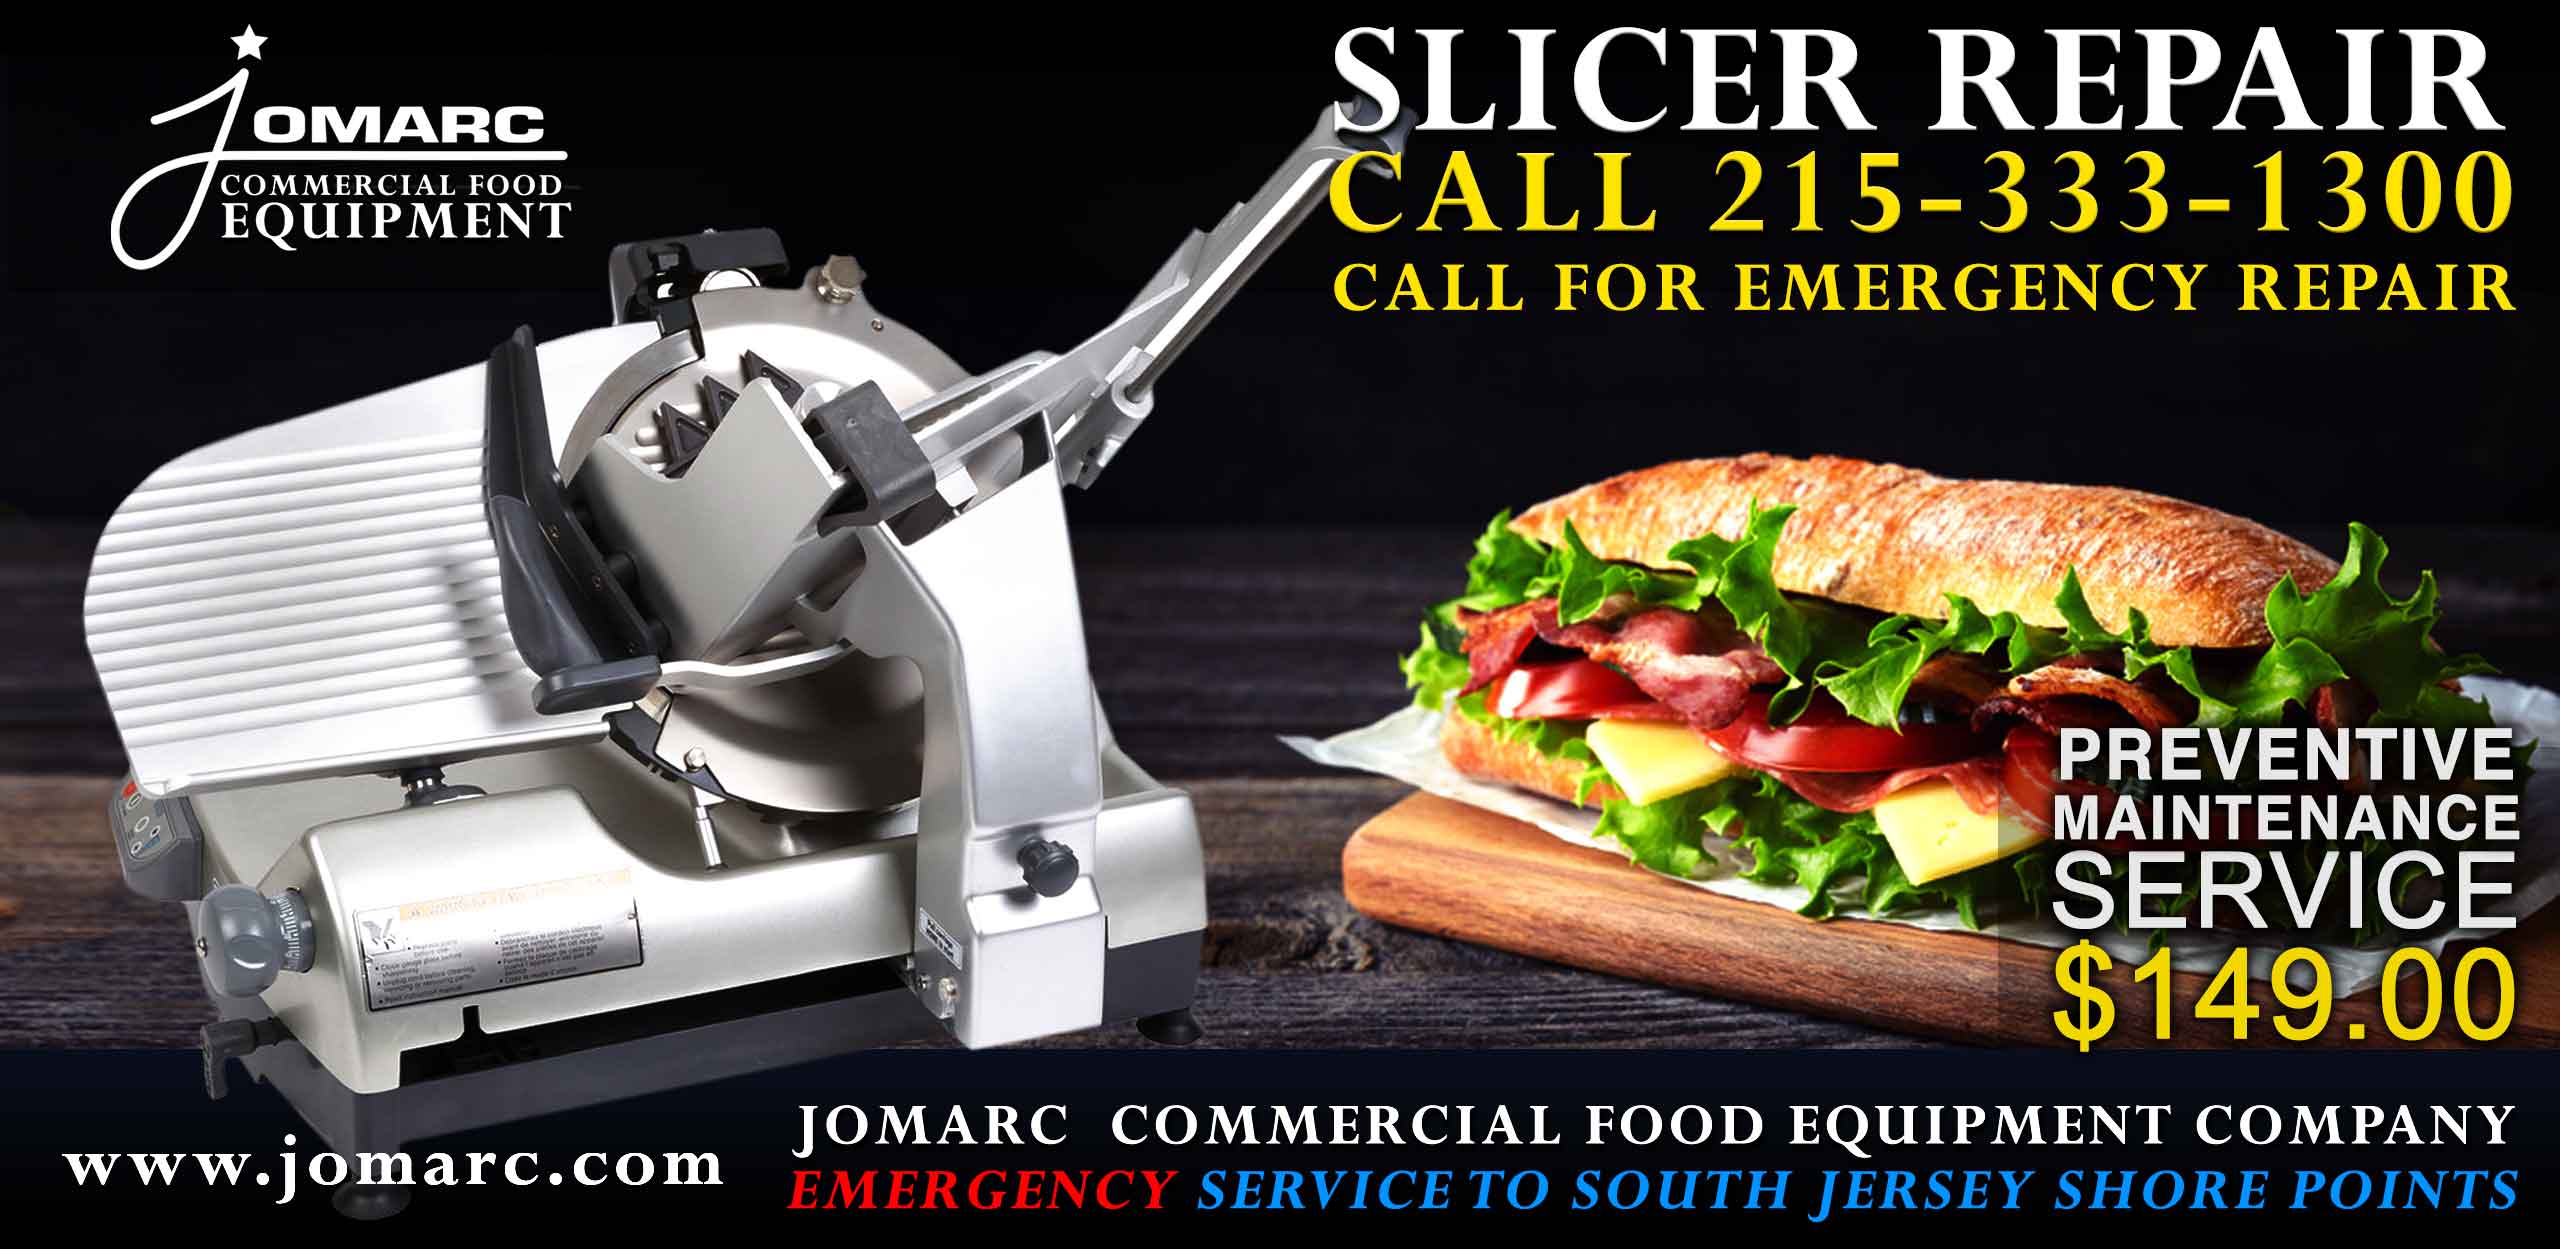 Commercial Food Equipment Repair New Jersey Atlantic County Cape May Hobart Dough Mixer Repair Pizza Oven Dishwashers Ovens Fryers Slicers Steamers 